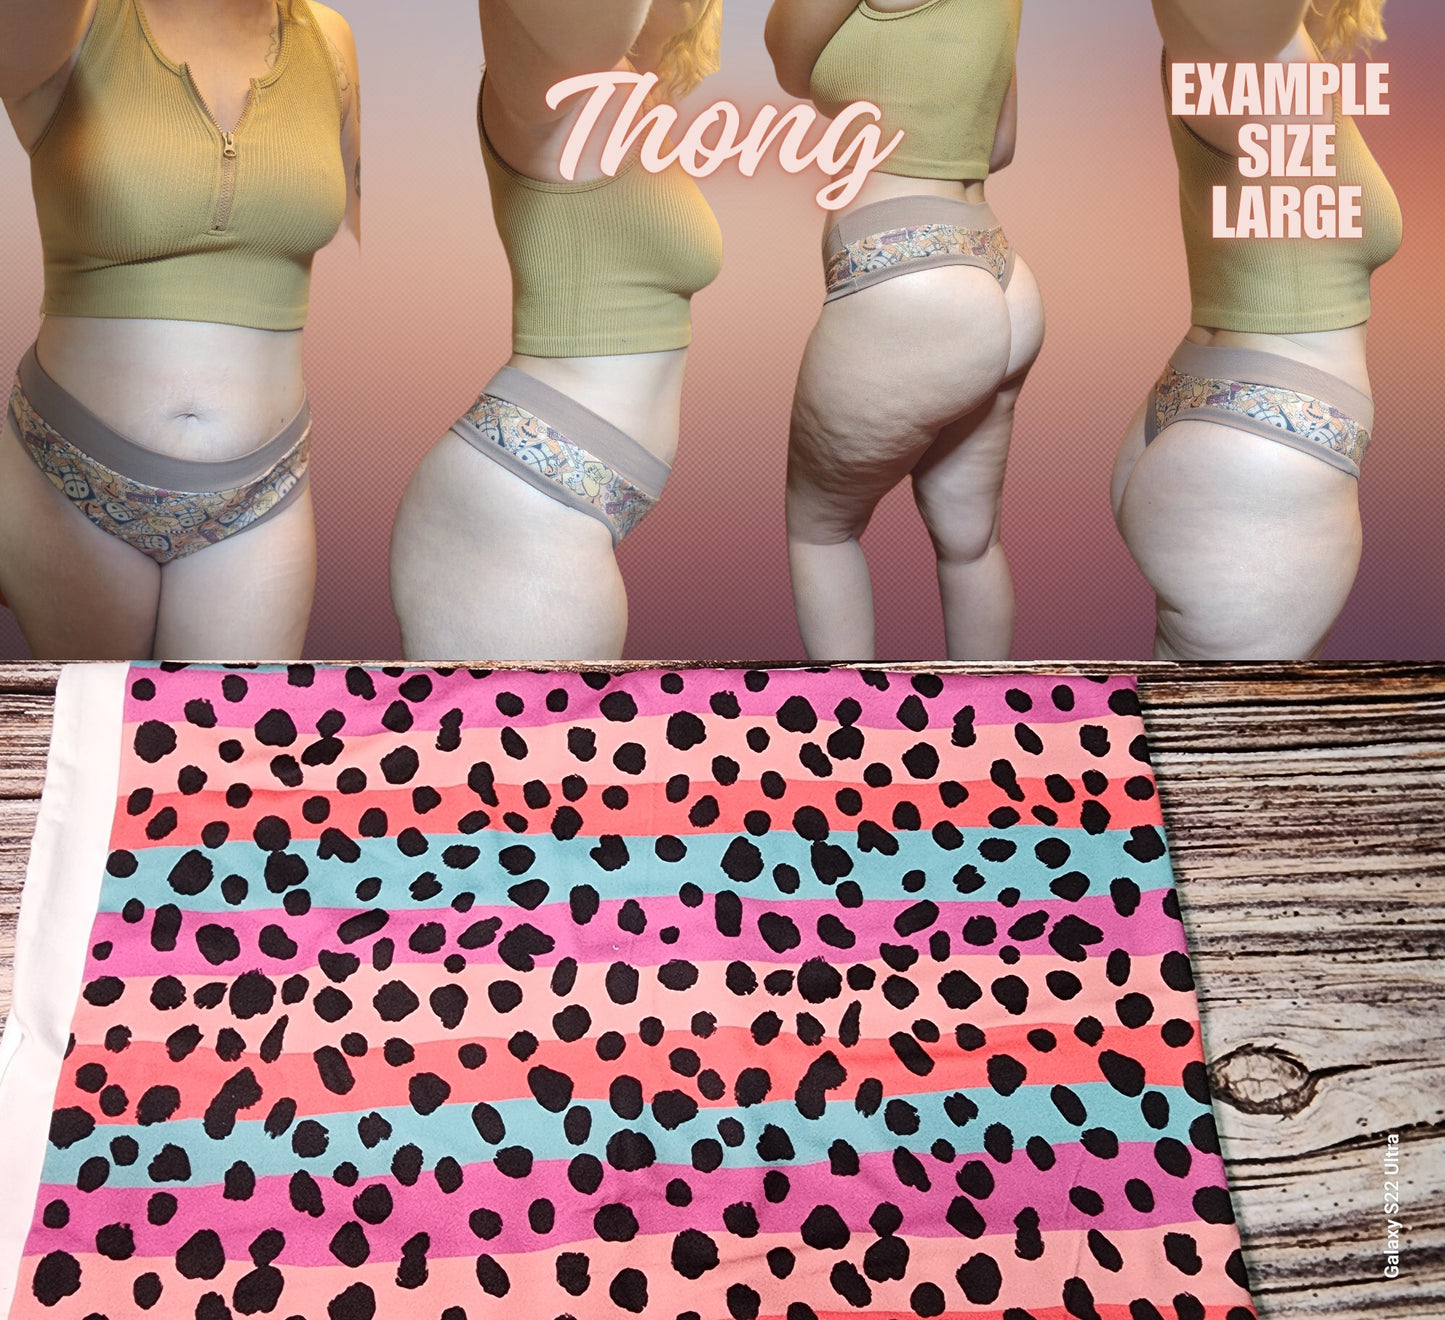 Tie Dye, Lines, Shells, Dots x6 Prints | Thondlewear, Thongs for every body | Elastic/Knit Bands